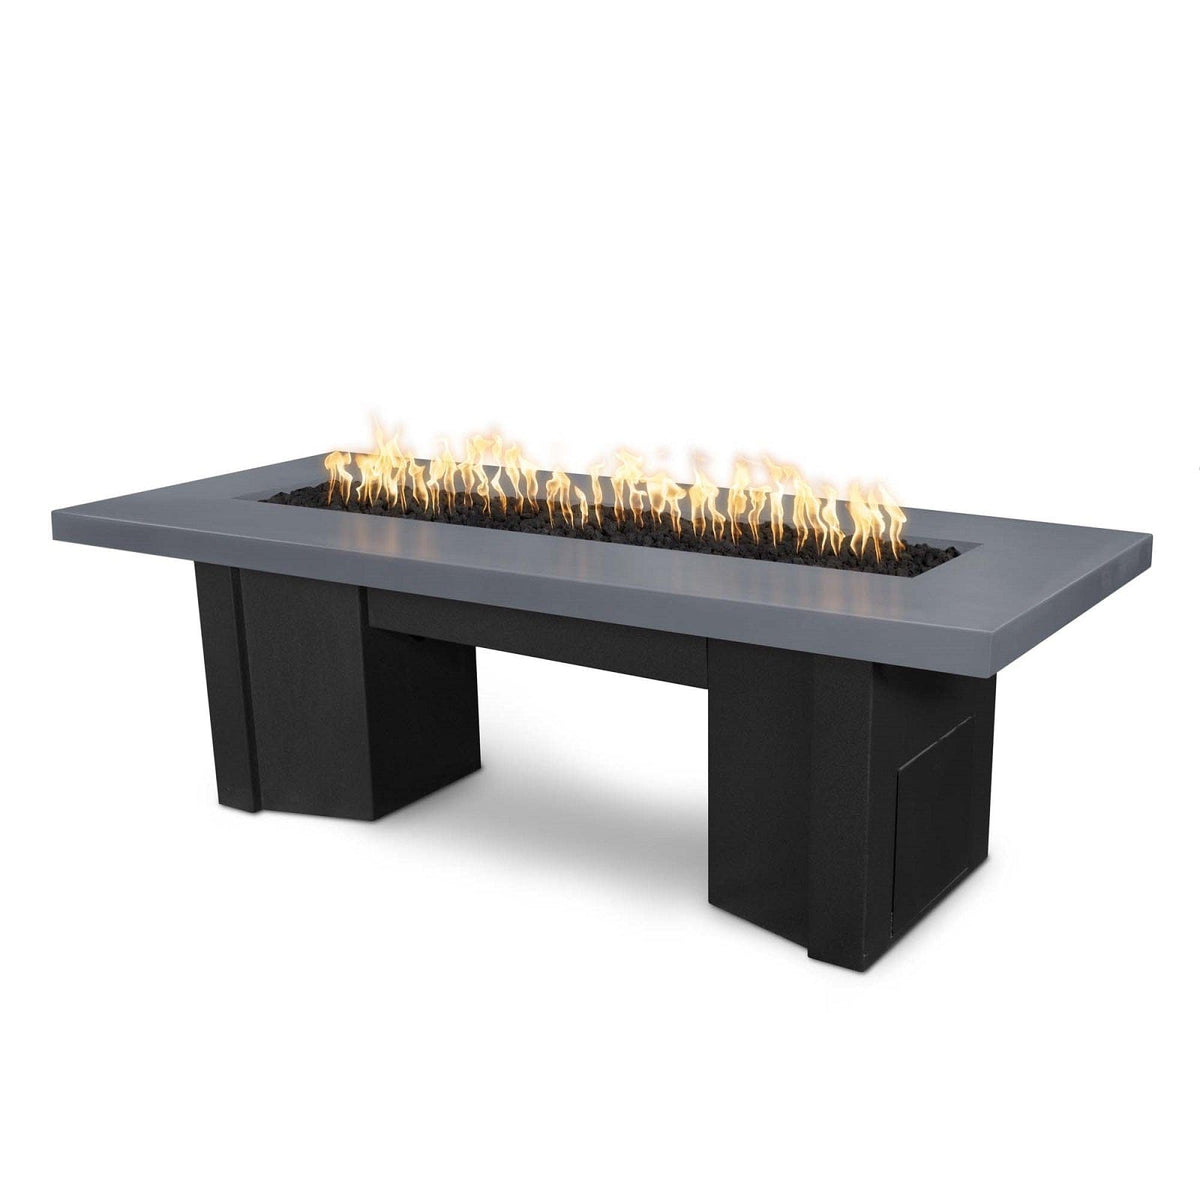 The Outdoor Plus Fire Features Gray (-GRY) / Black Powder Coated Steel (-BLK) The Outdoor Plus 78&quot; Alameda Fire Table Smooth Concrete in Liquid Propane - Match Lit / OPT-ALMGFRC78-LP